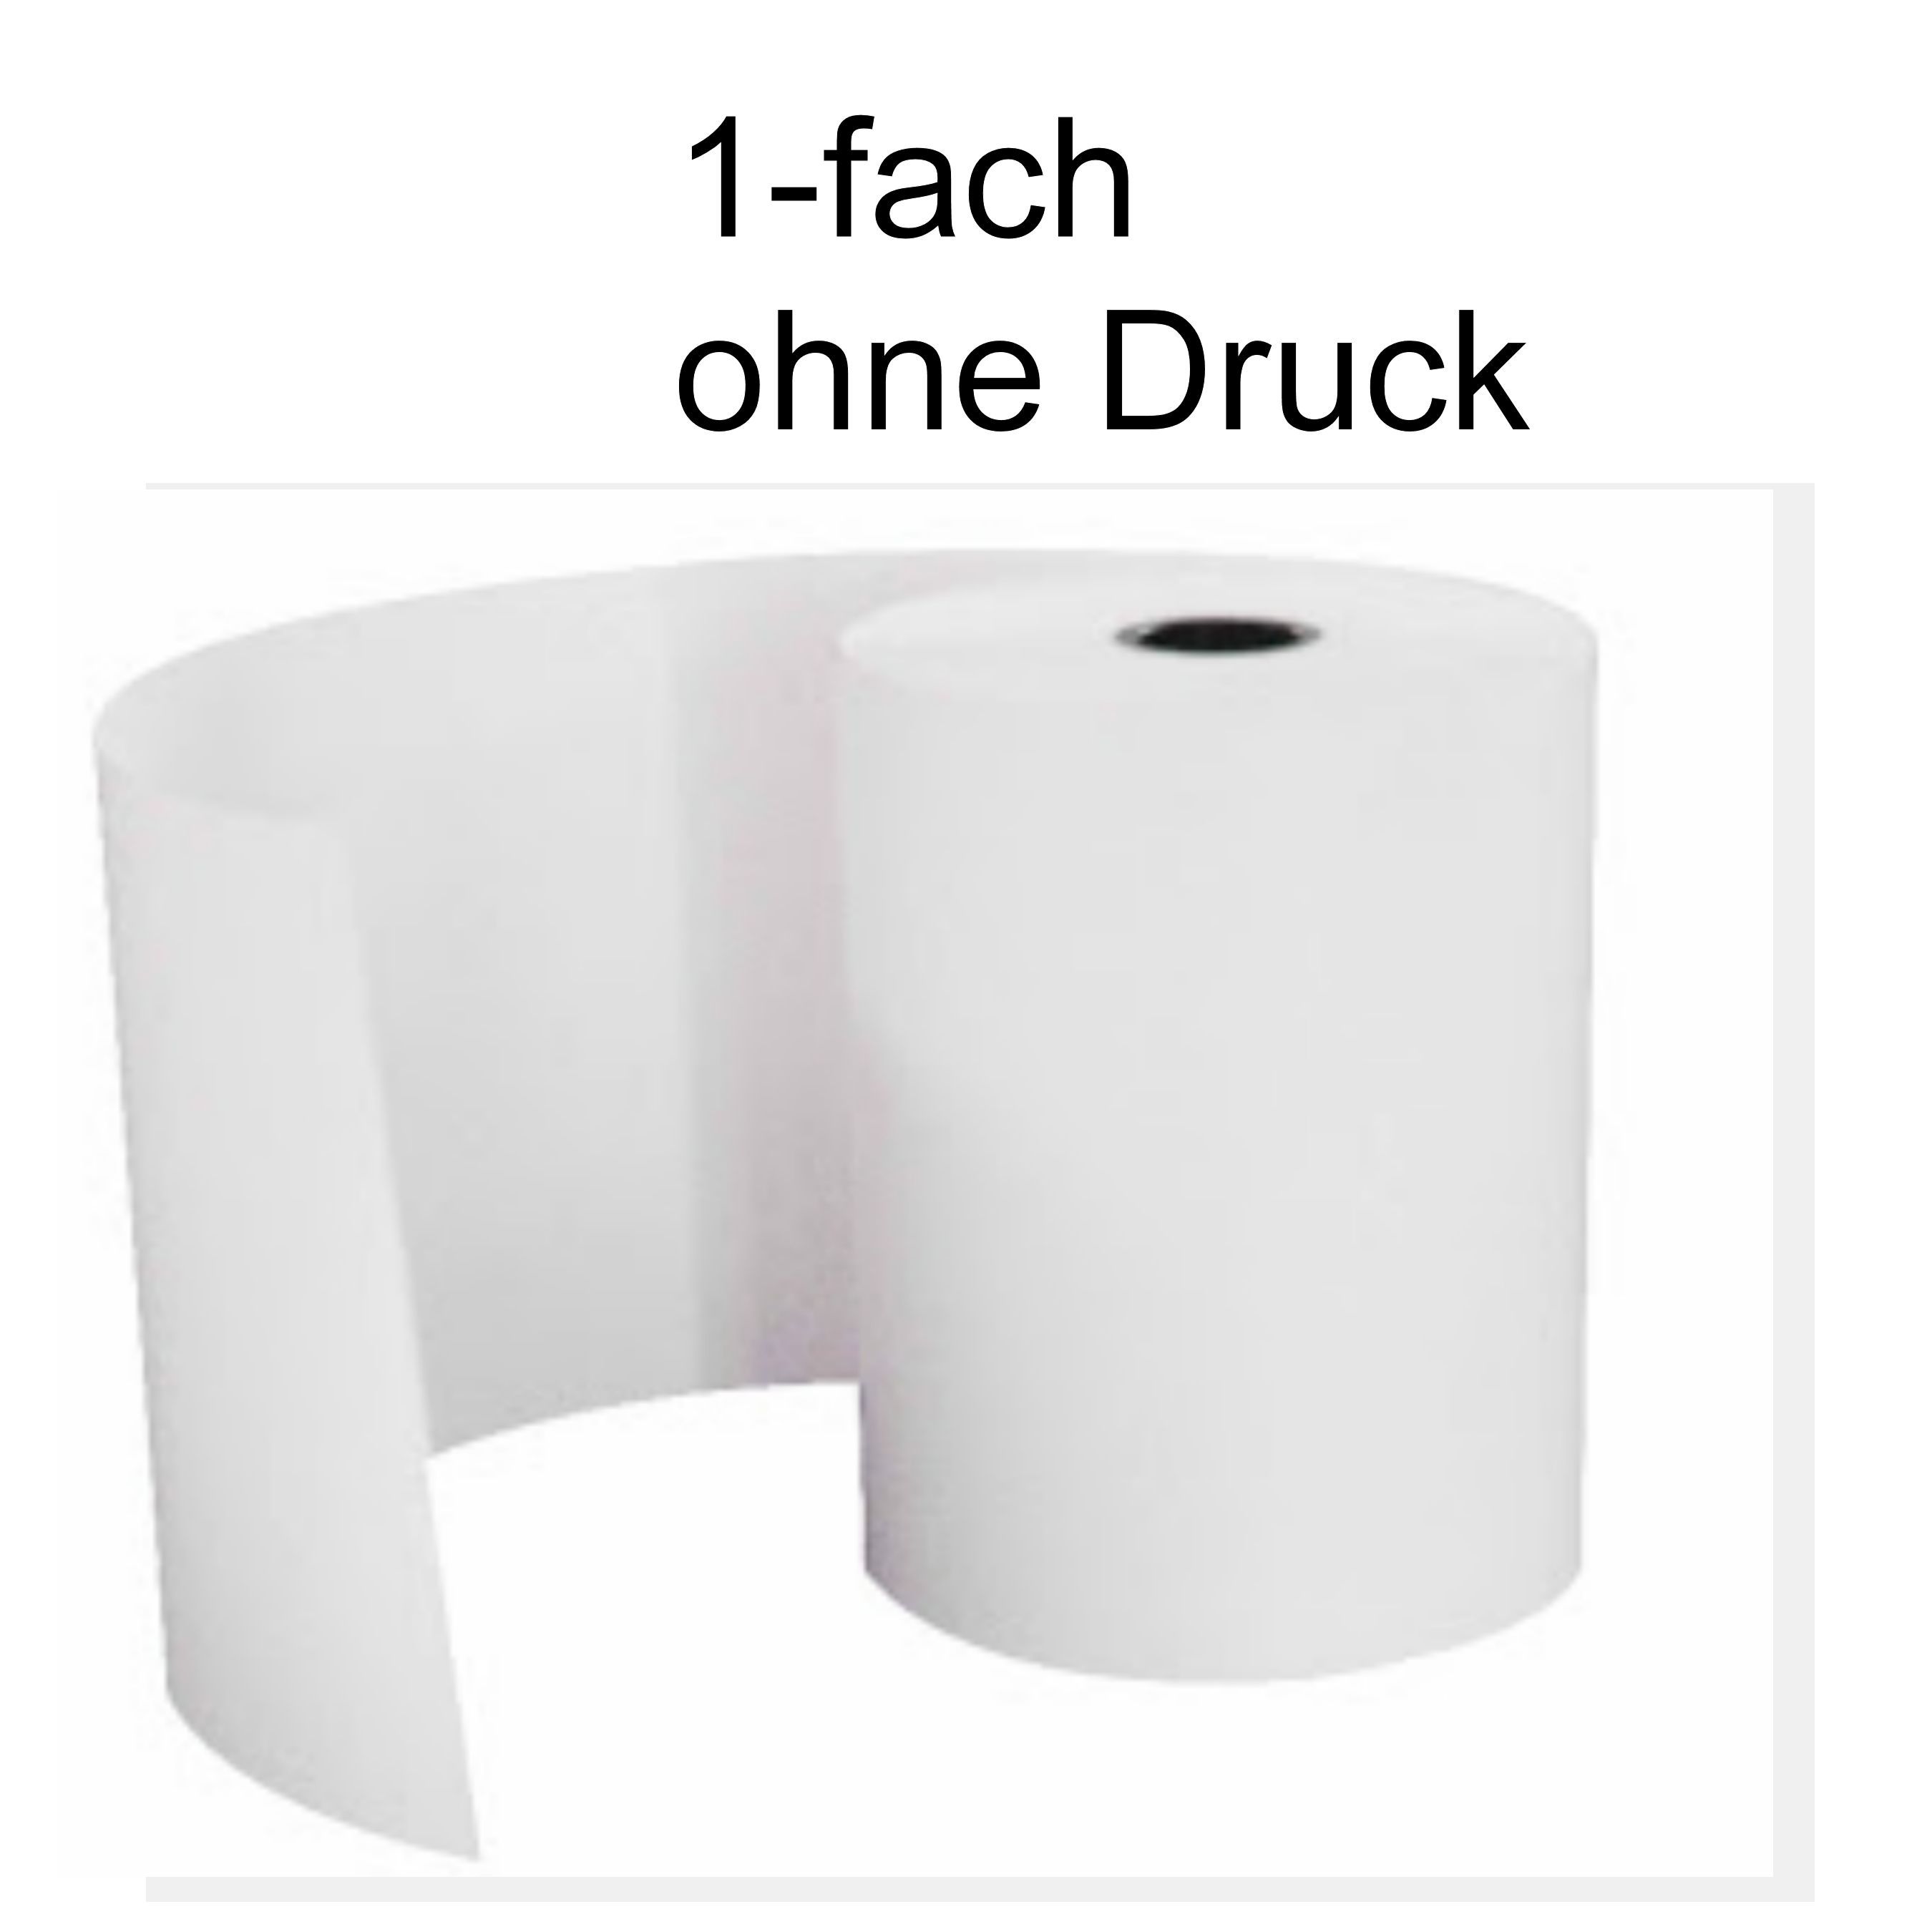 THERMOROLLE 5725: Thermal rolls, set of 5, 25 m, 57 mm at reichelt  elektronik